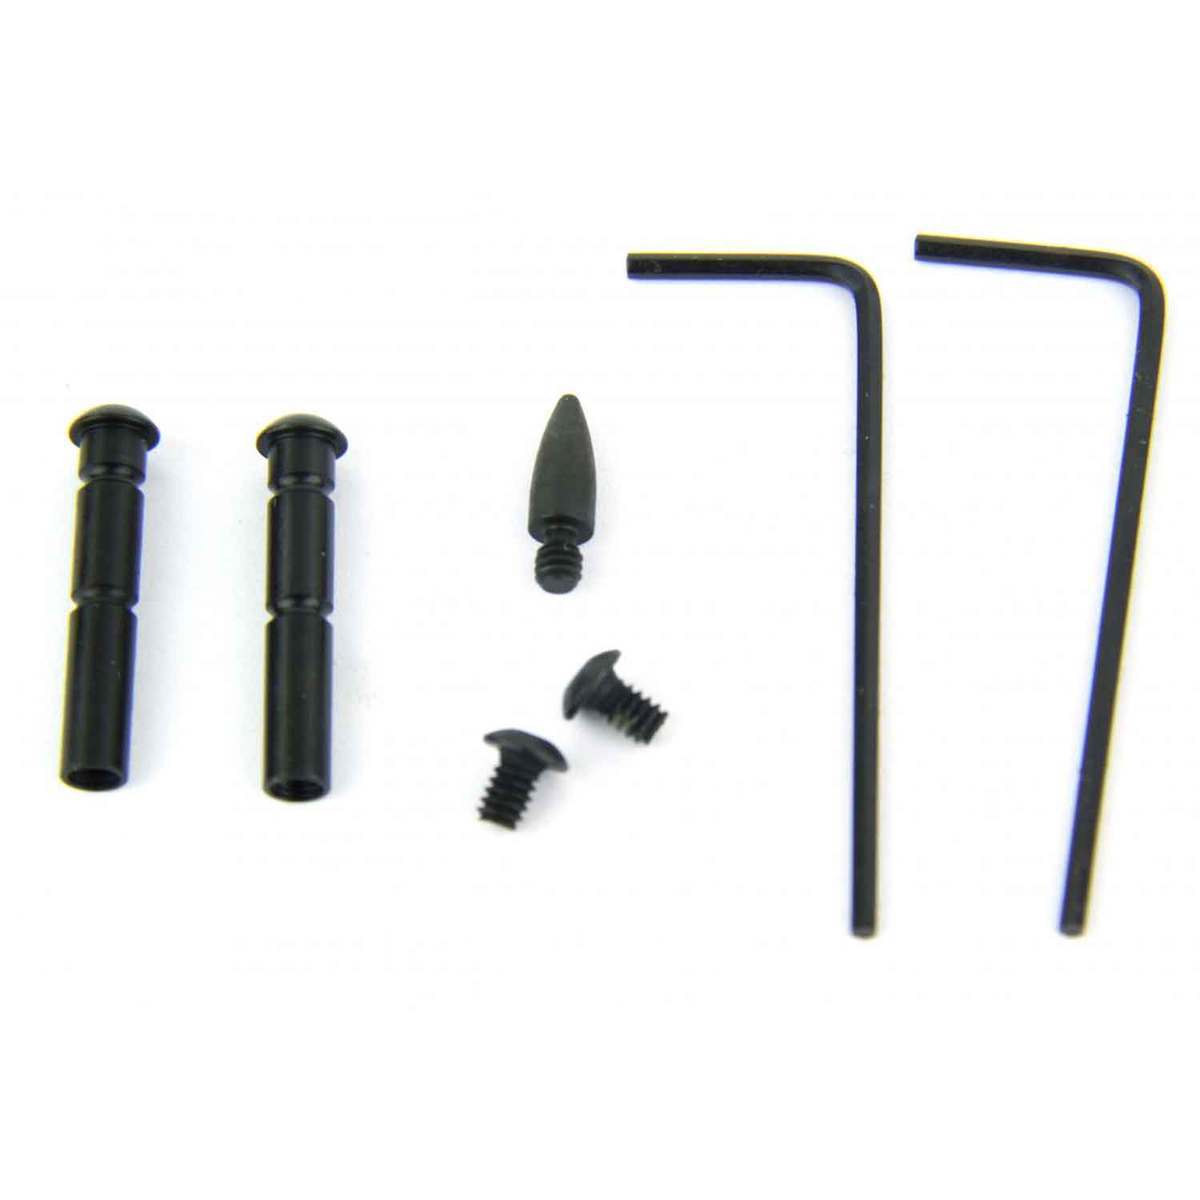 Strike Industries AR Anti-Walk Pins  $1.00 Off Highly Rated Free Shipping  over $49!